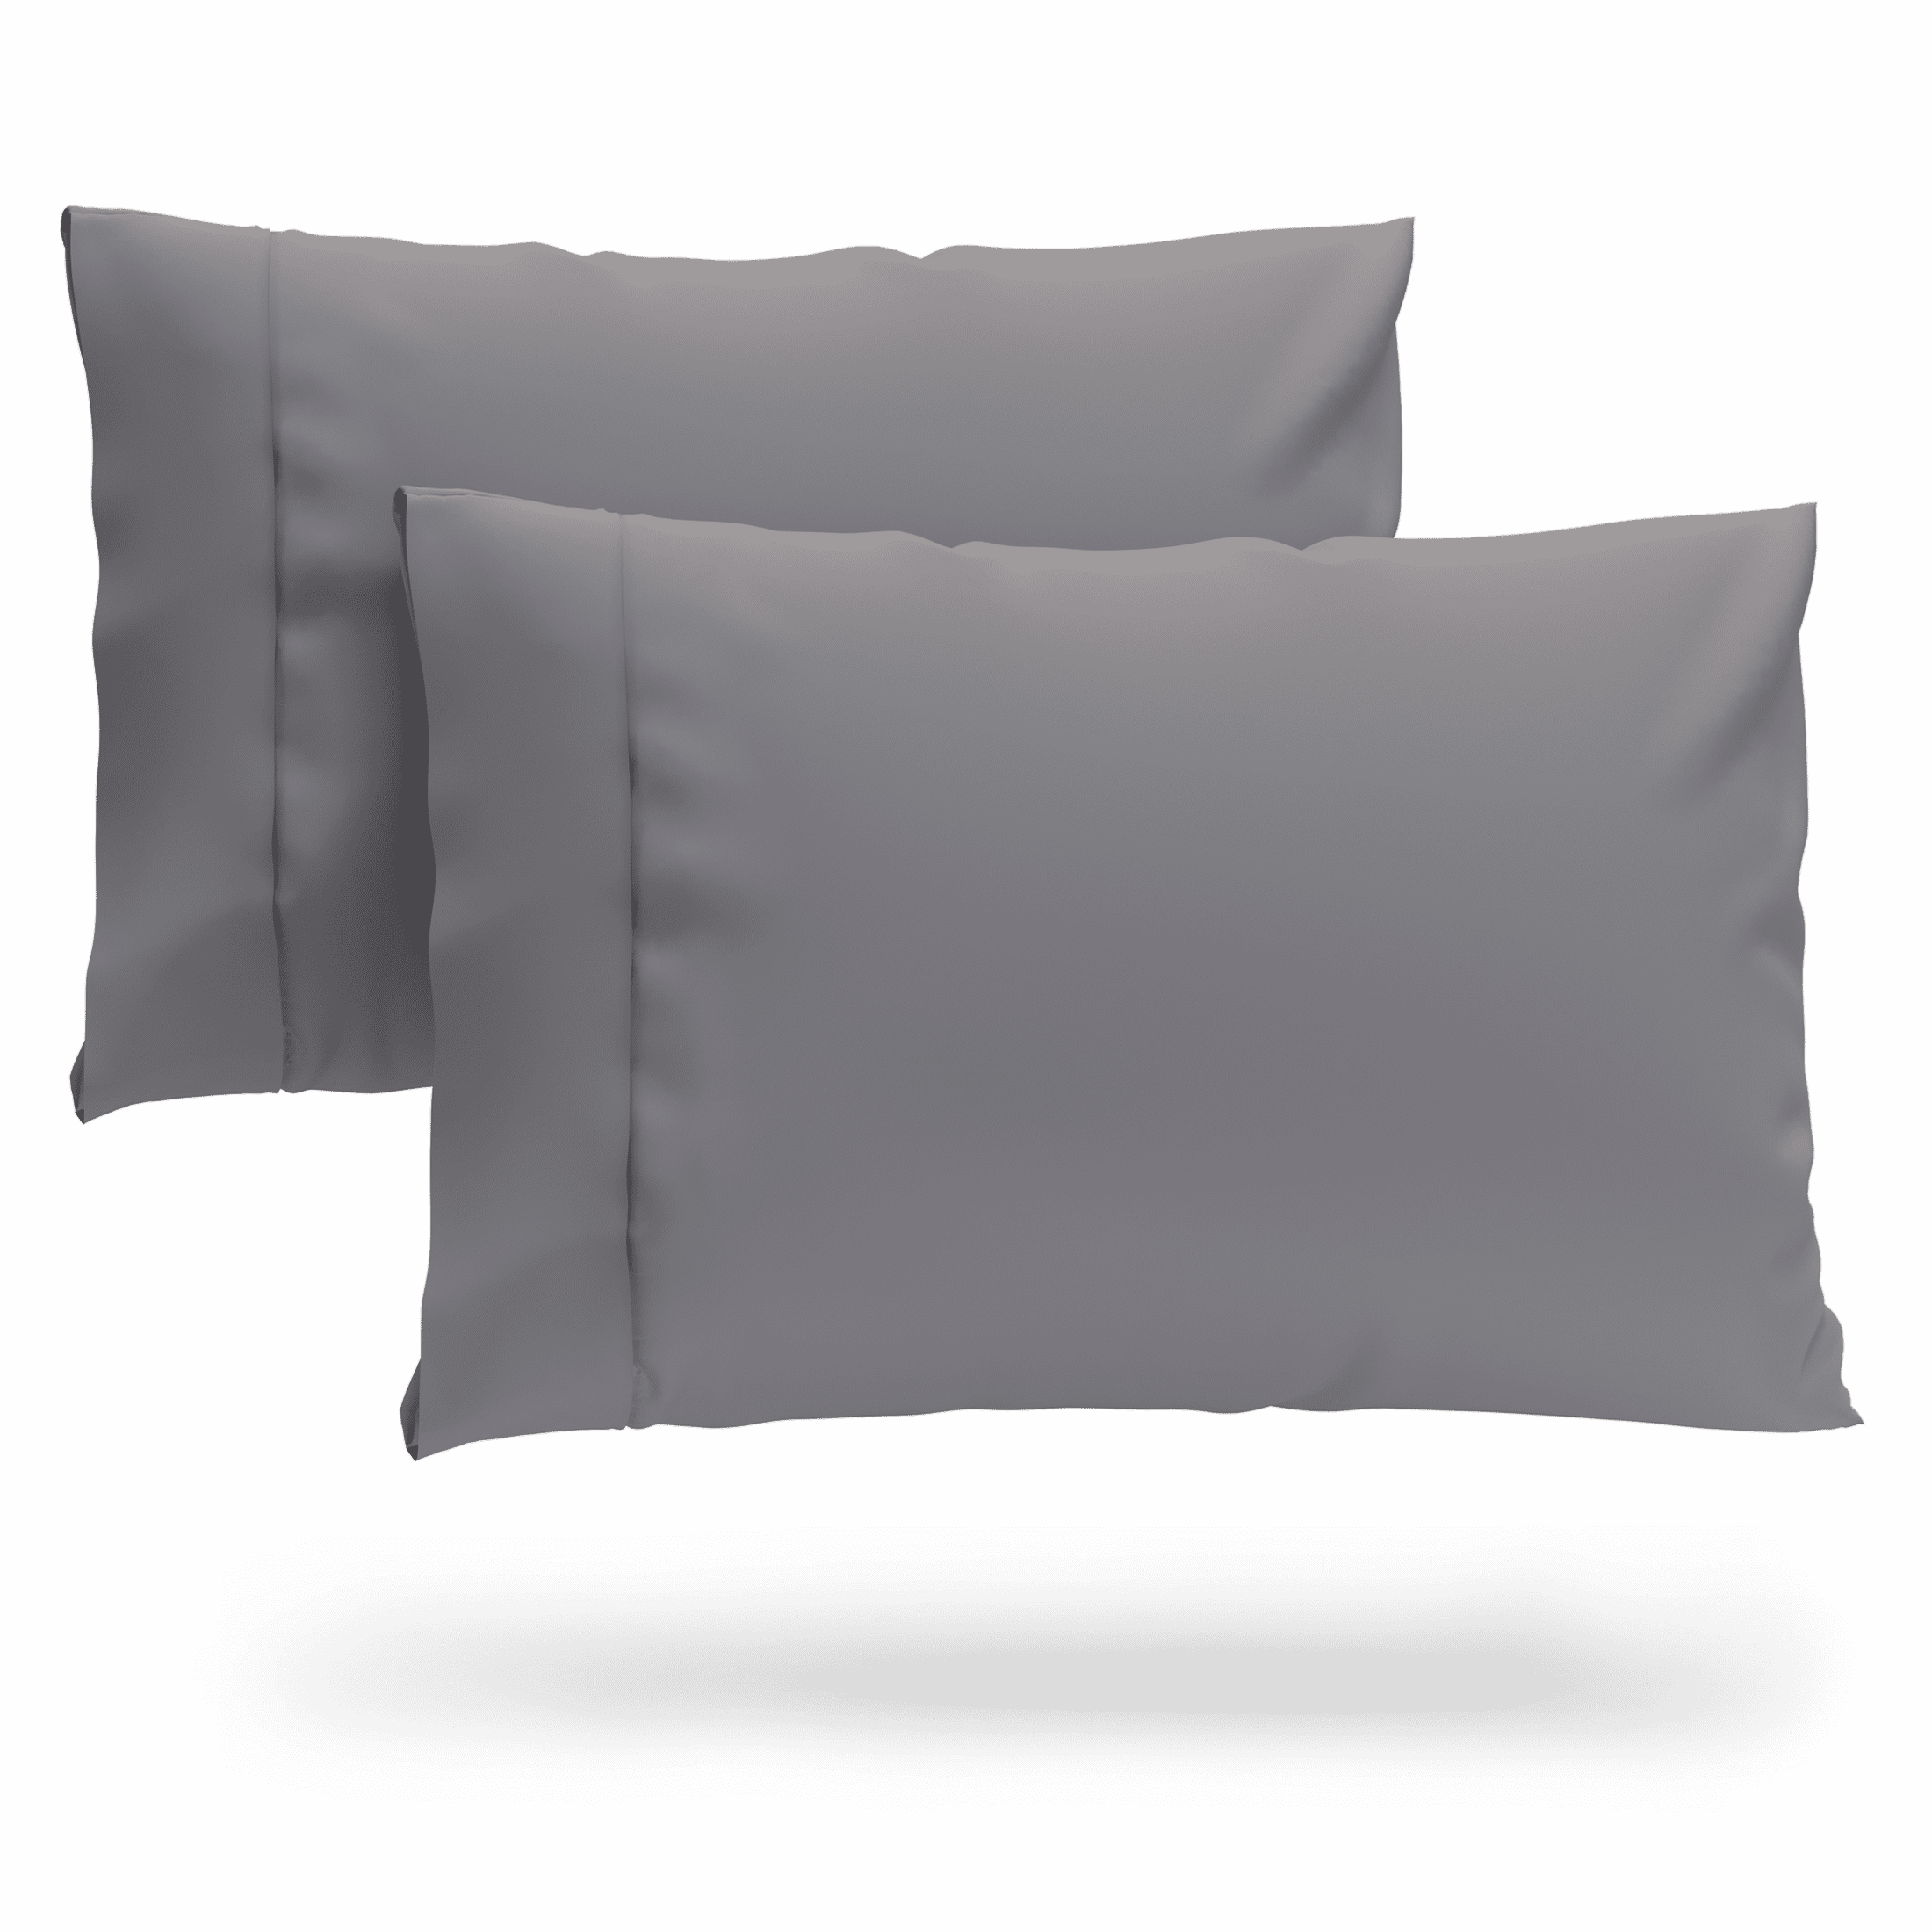 Luxury Bamboo Pillowcase Set of 2 Standard or King Size Pillow Cases 